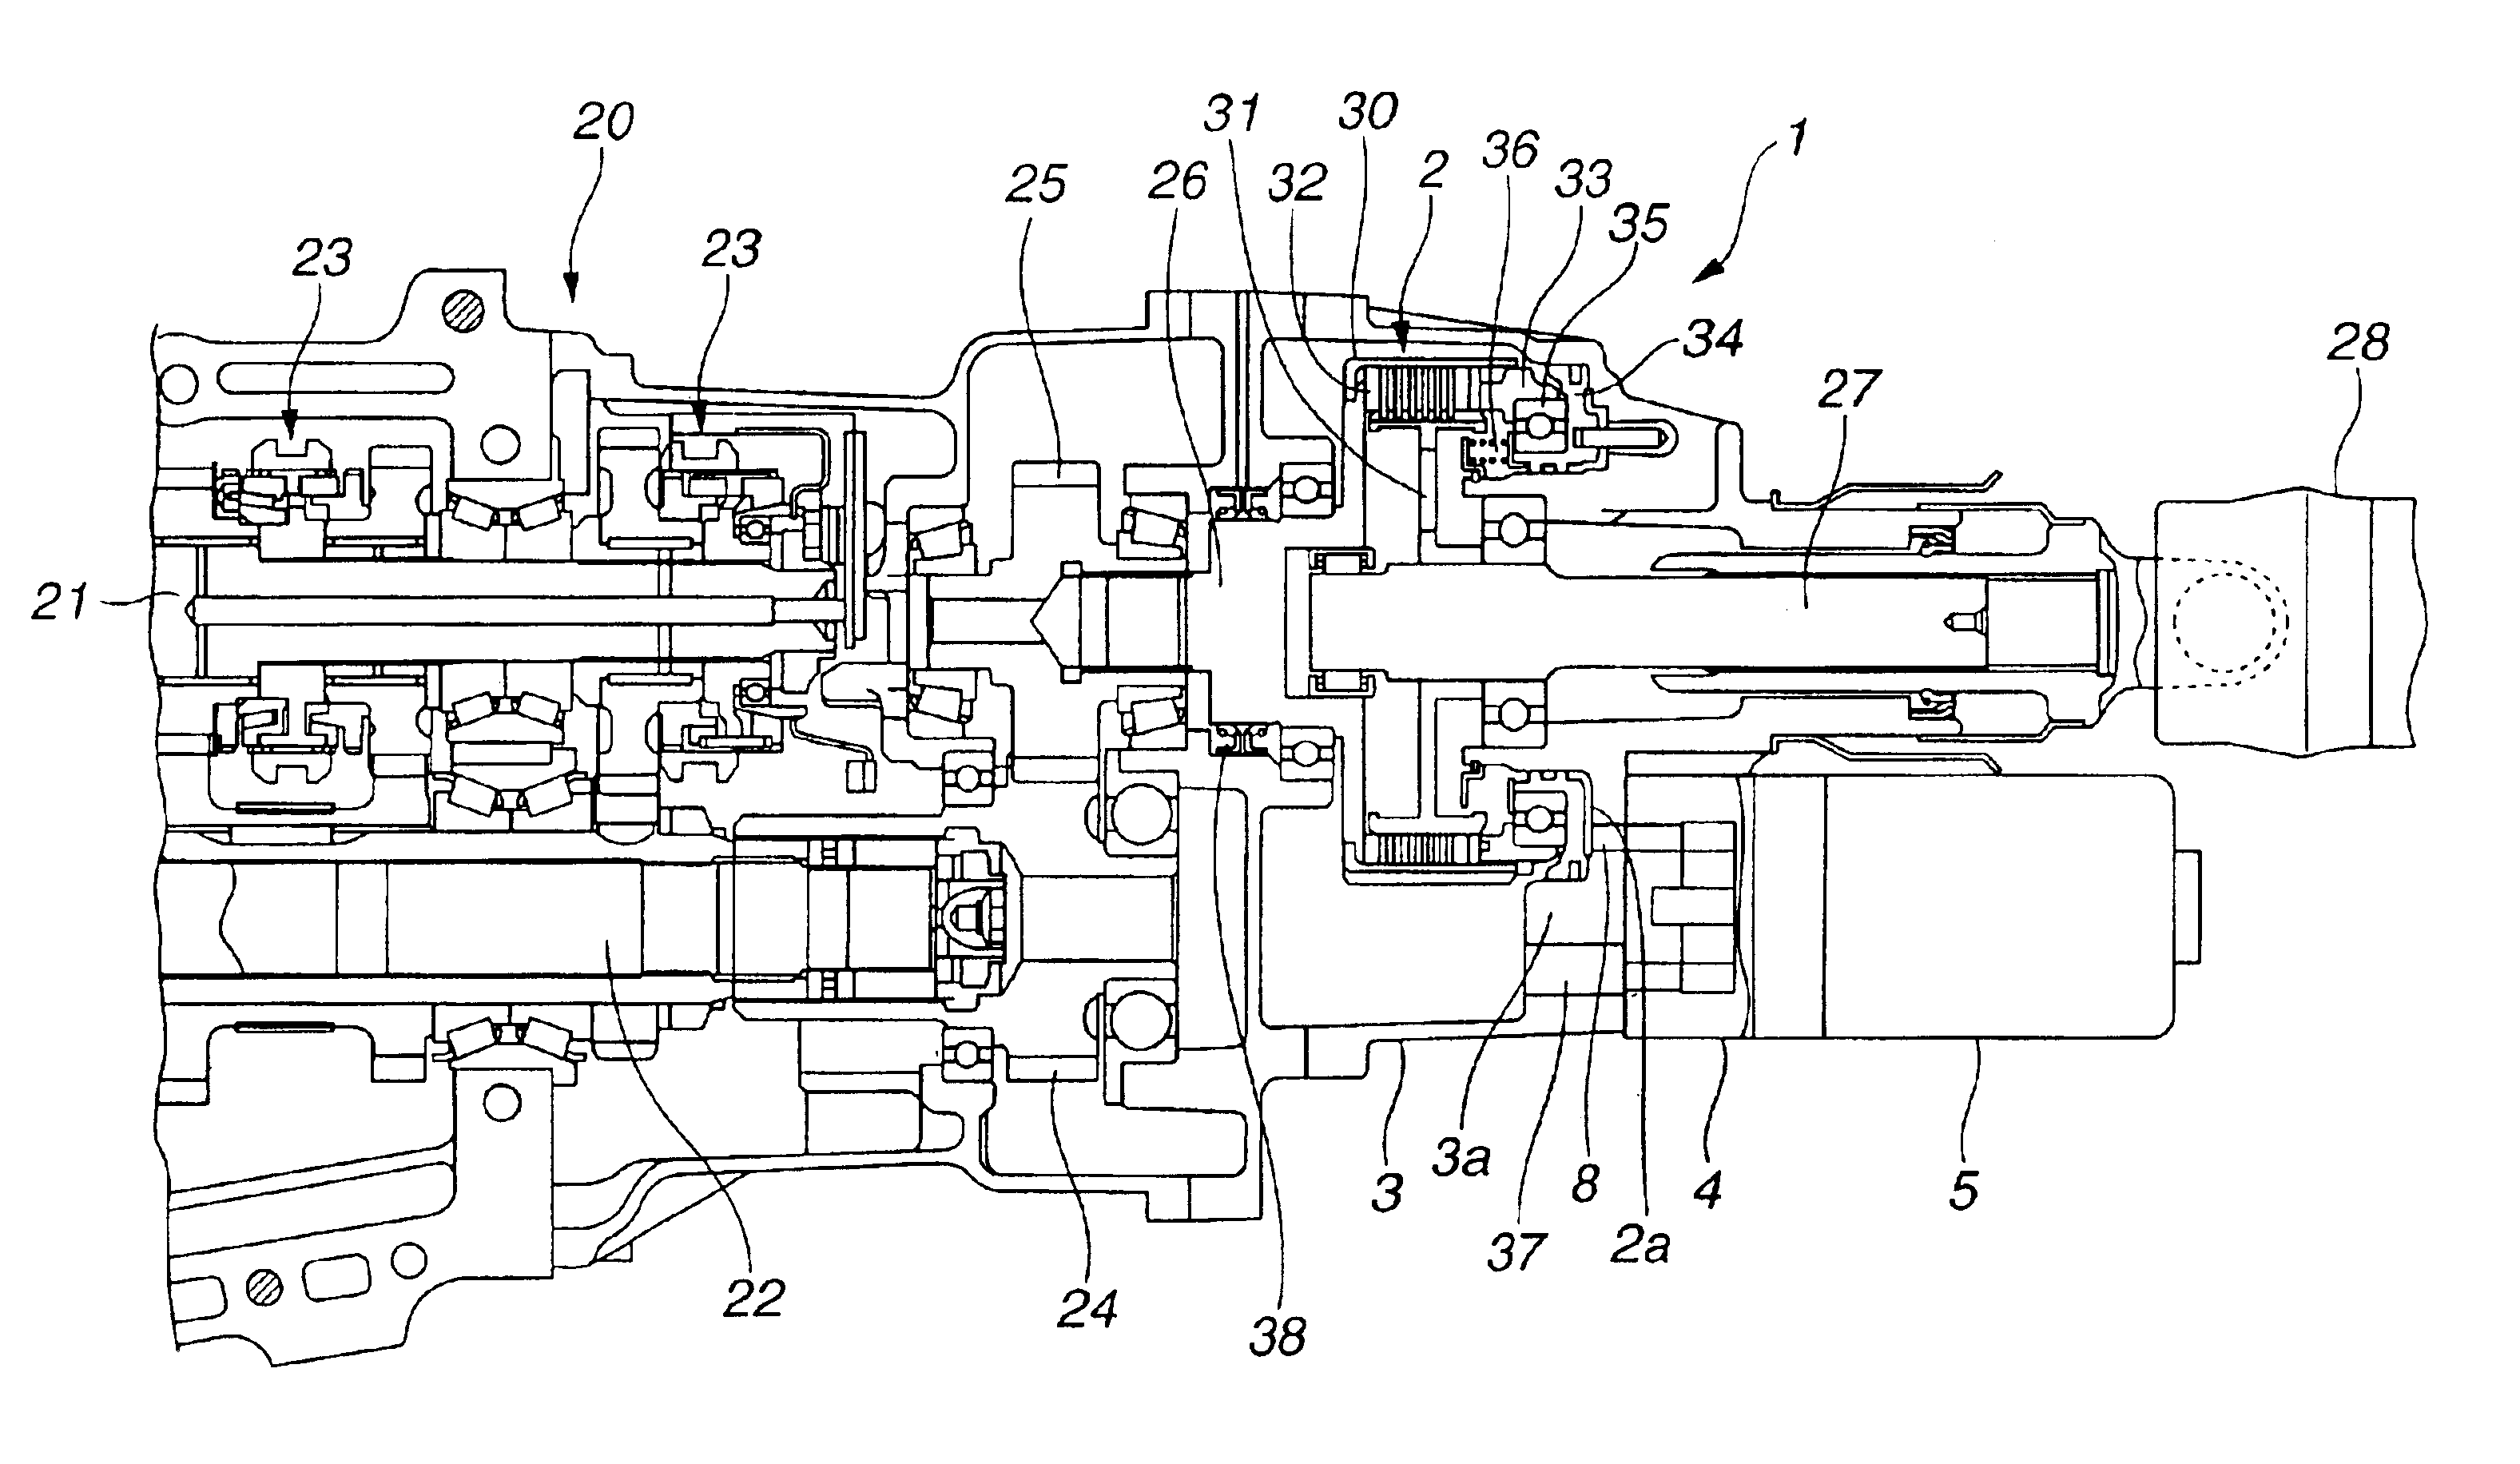 Electronic controlled coupling